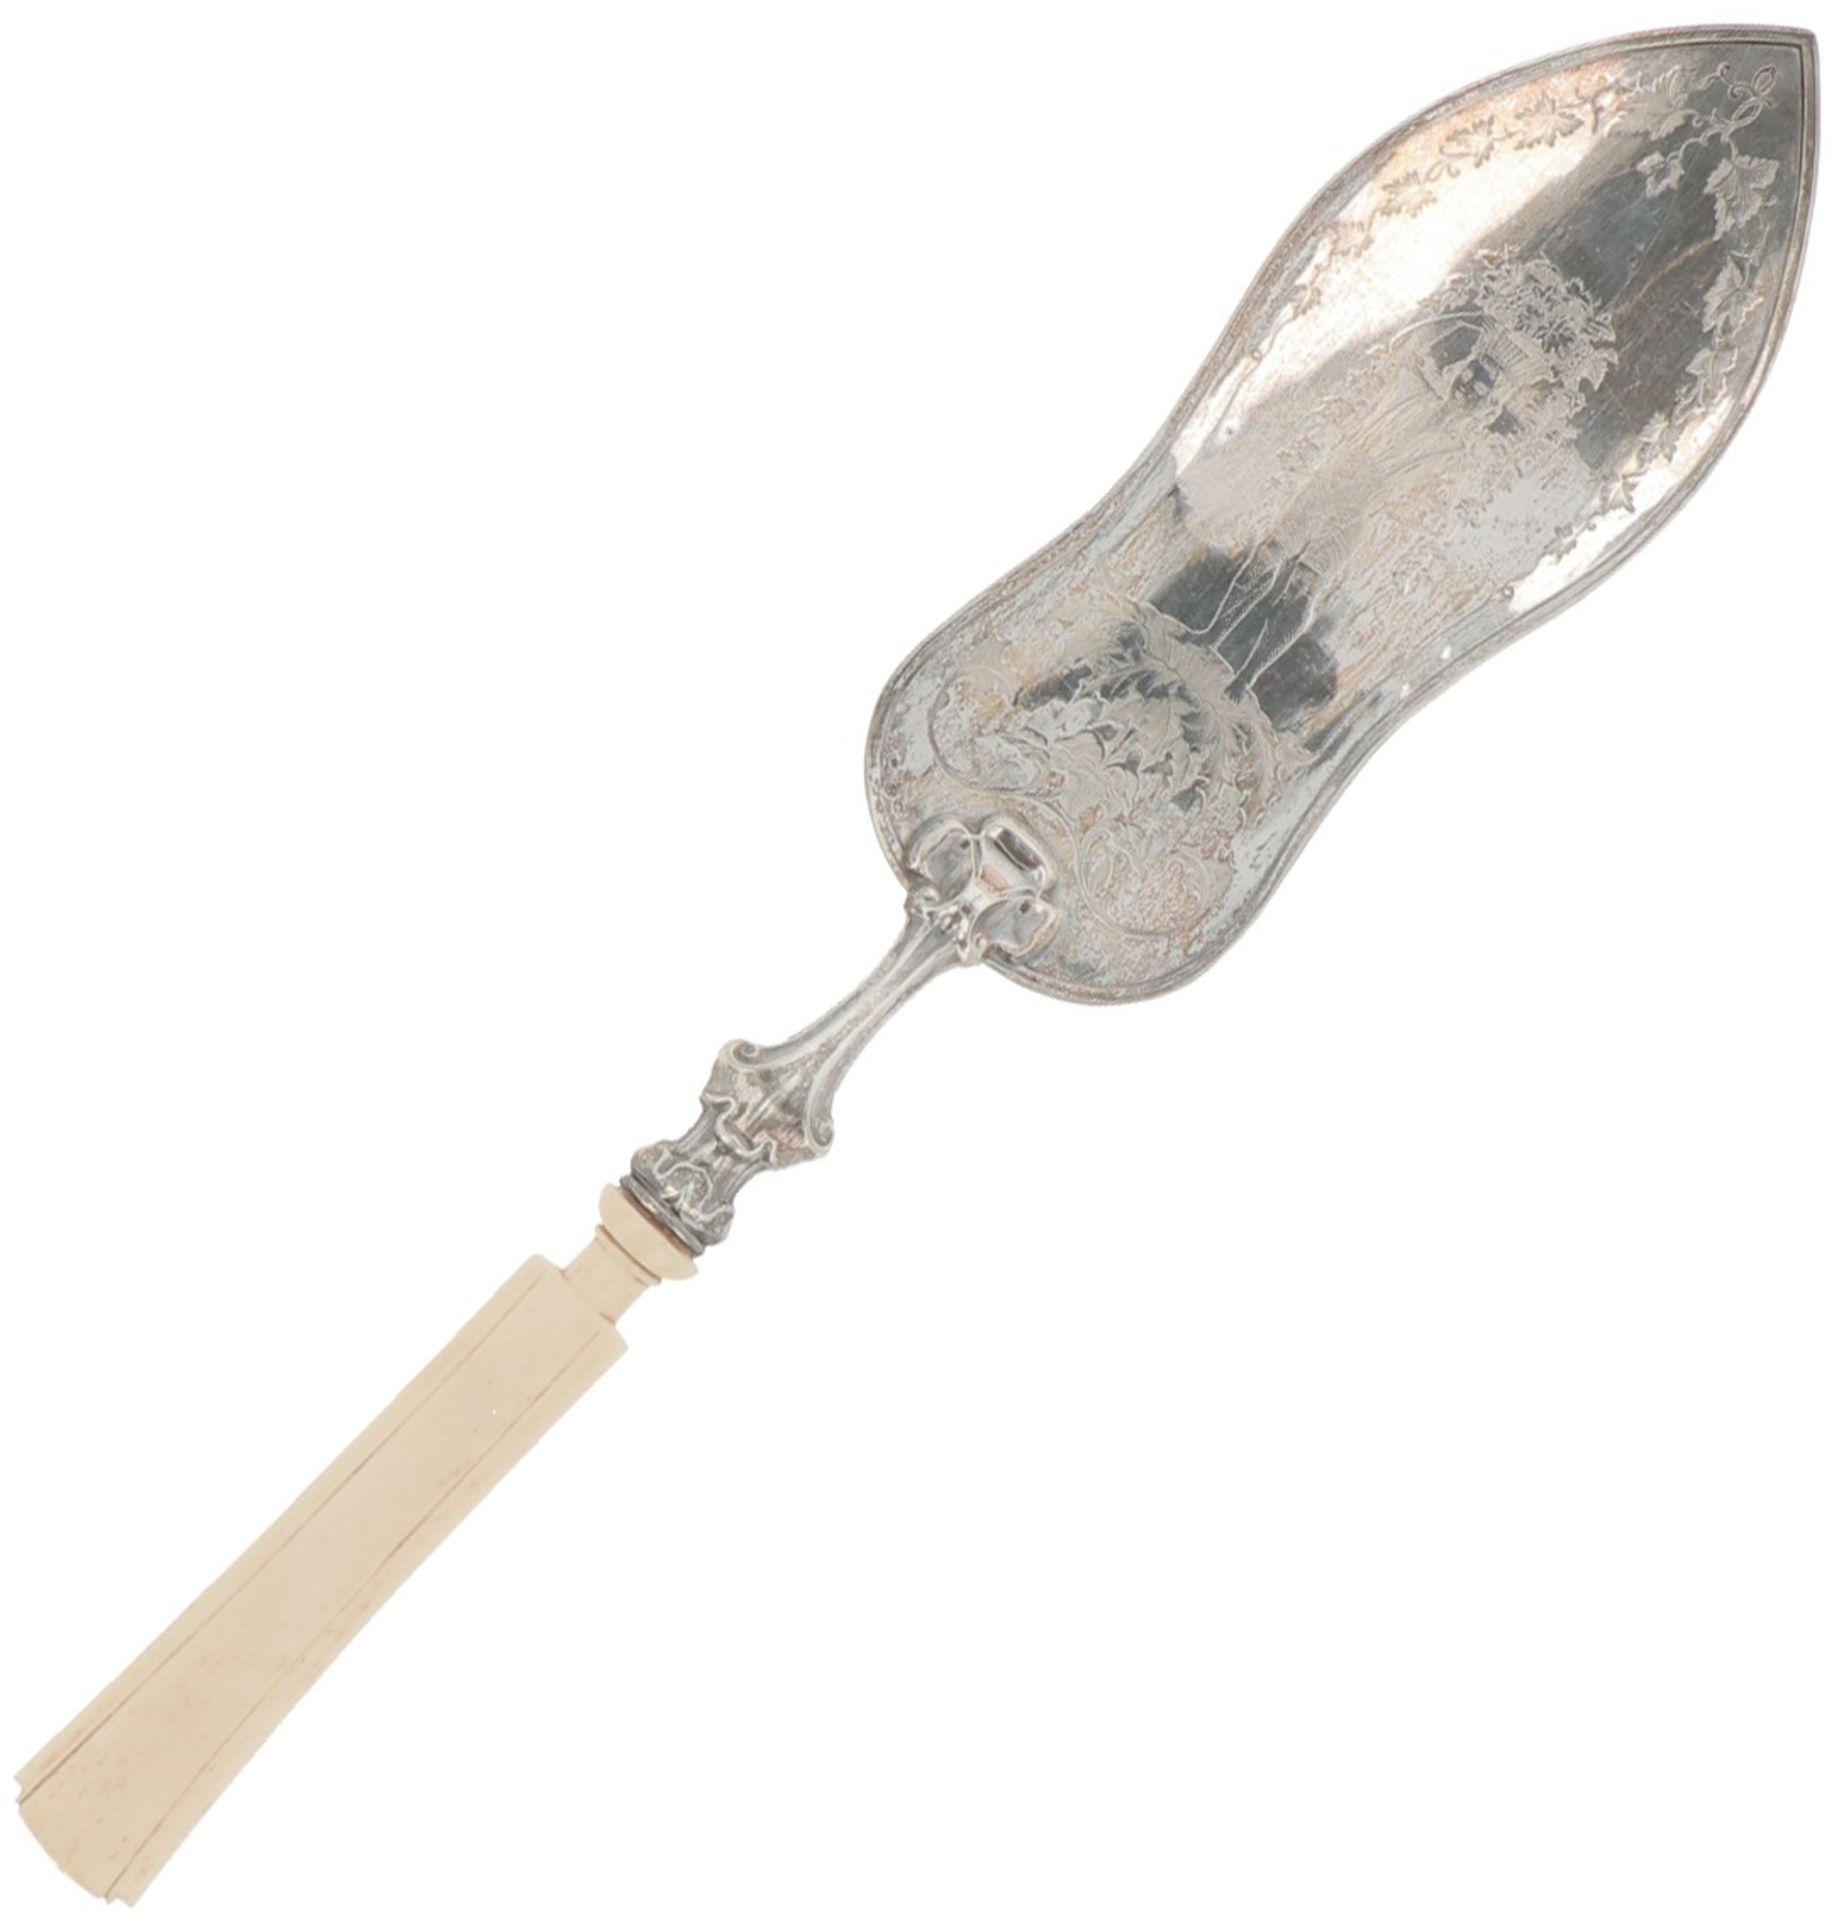 Pastry spoon silver.